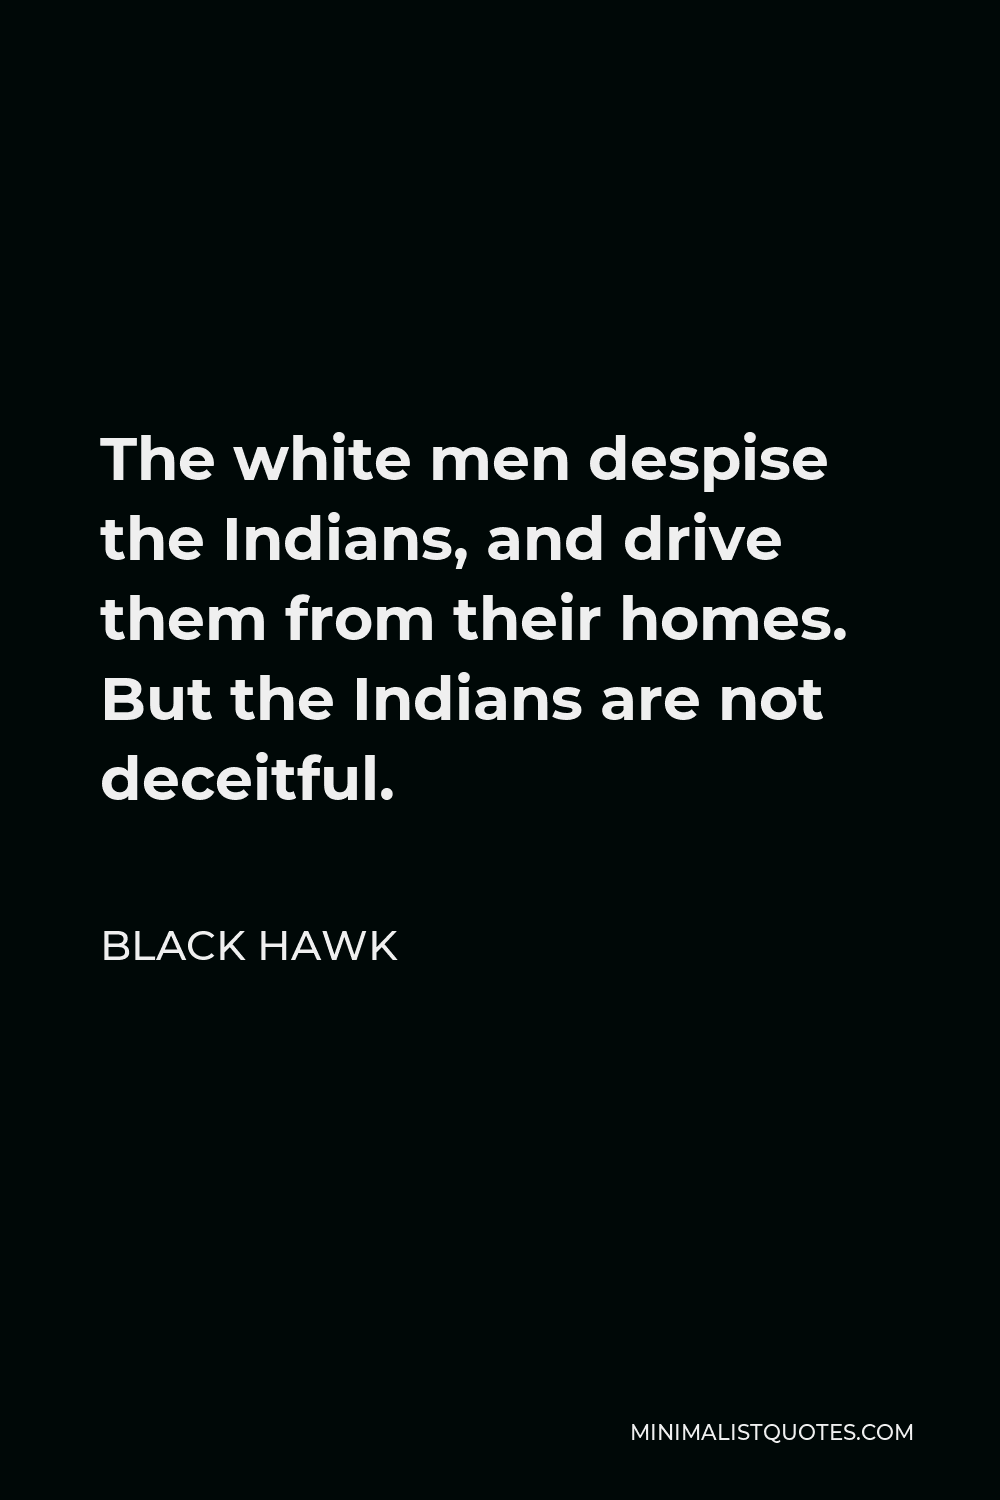 Black Hawk Quote - The white men despise the Indians, and drive them from their homes. But the Indians are not deceitful.